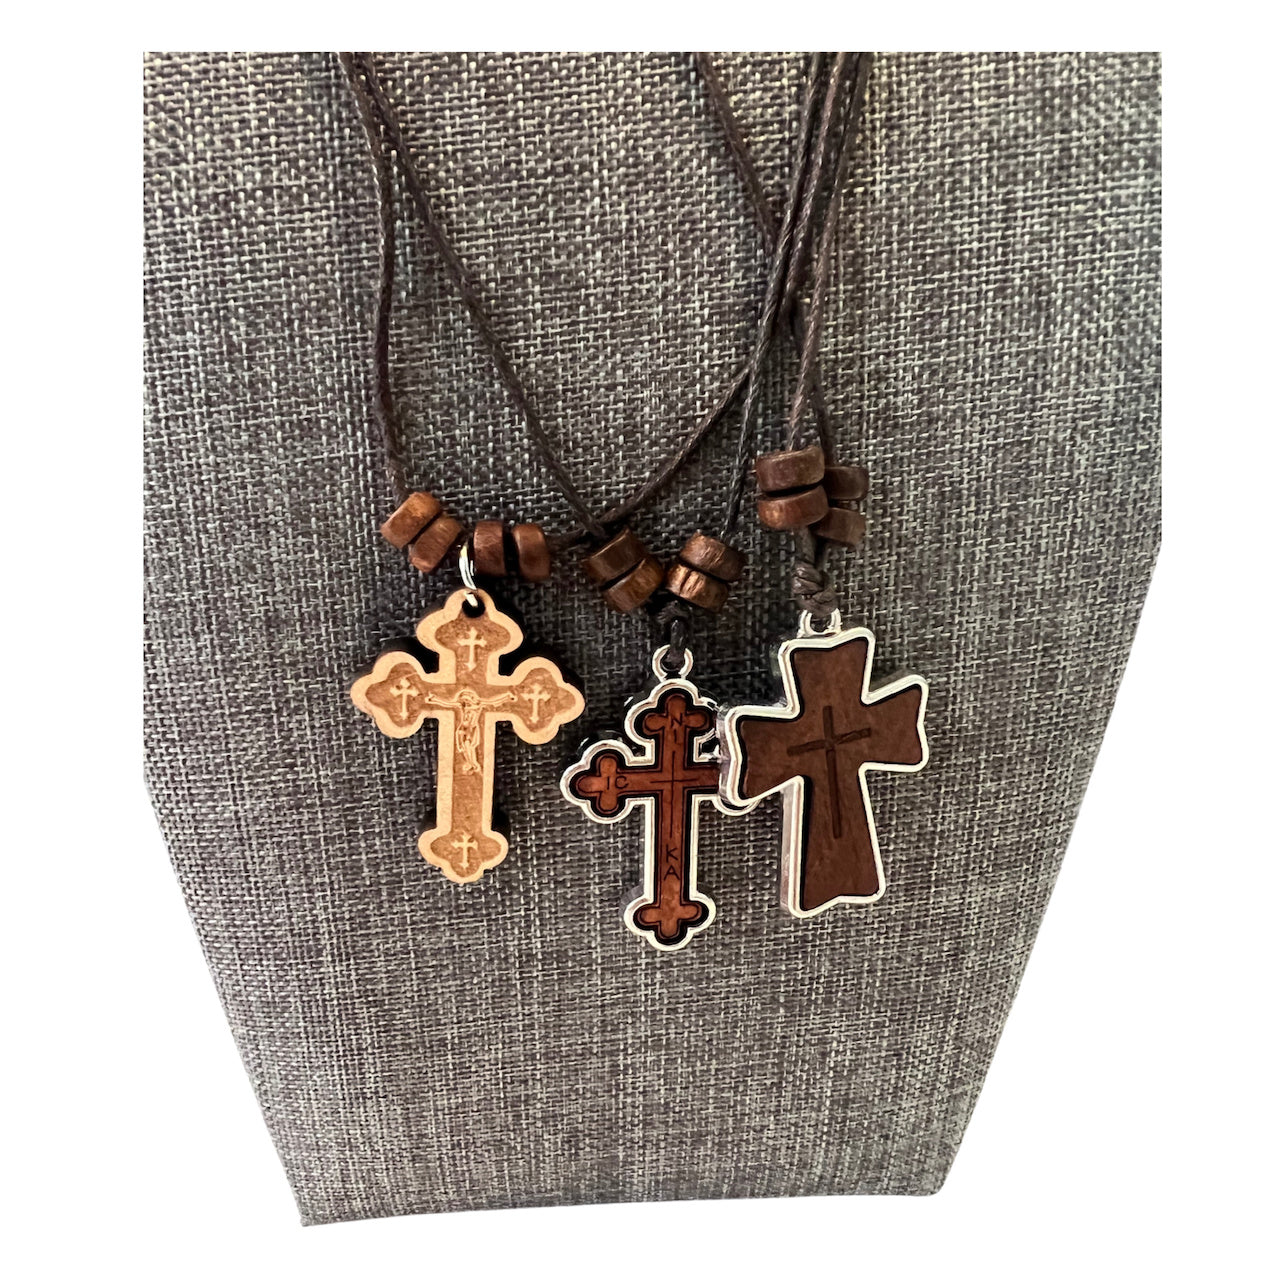 Orthodox Wooden Cross, Crucifix Necklace, Orthodox Crucifix, Pectoral Cross,  Orthodox Cross, Wood Cross, Carved Wooden Cross - Etsy | Crucifix necklace,  Necklace lengths, Etsy